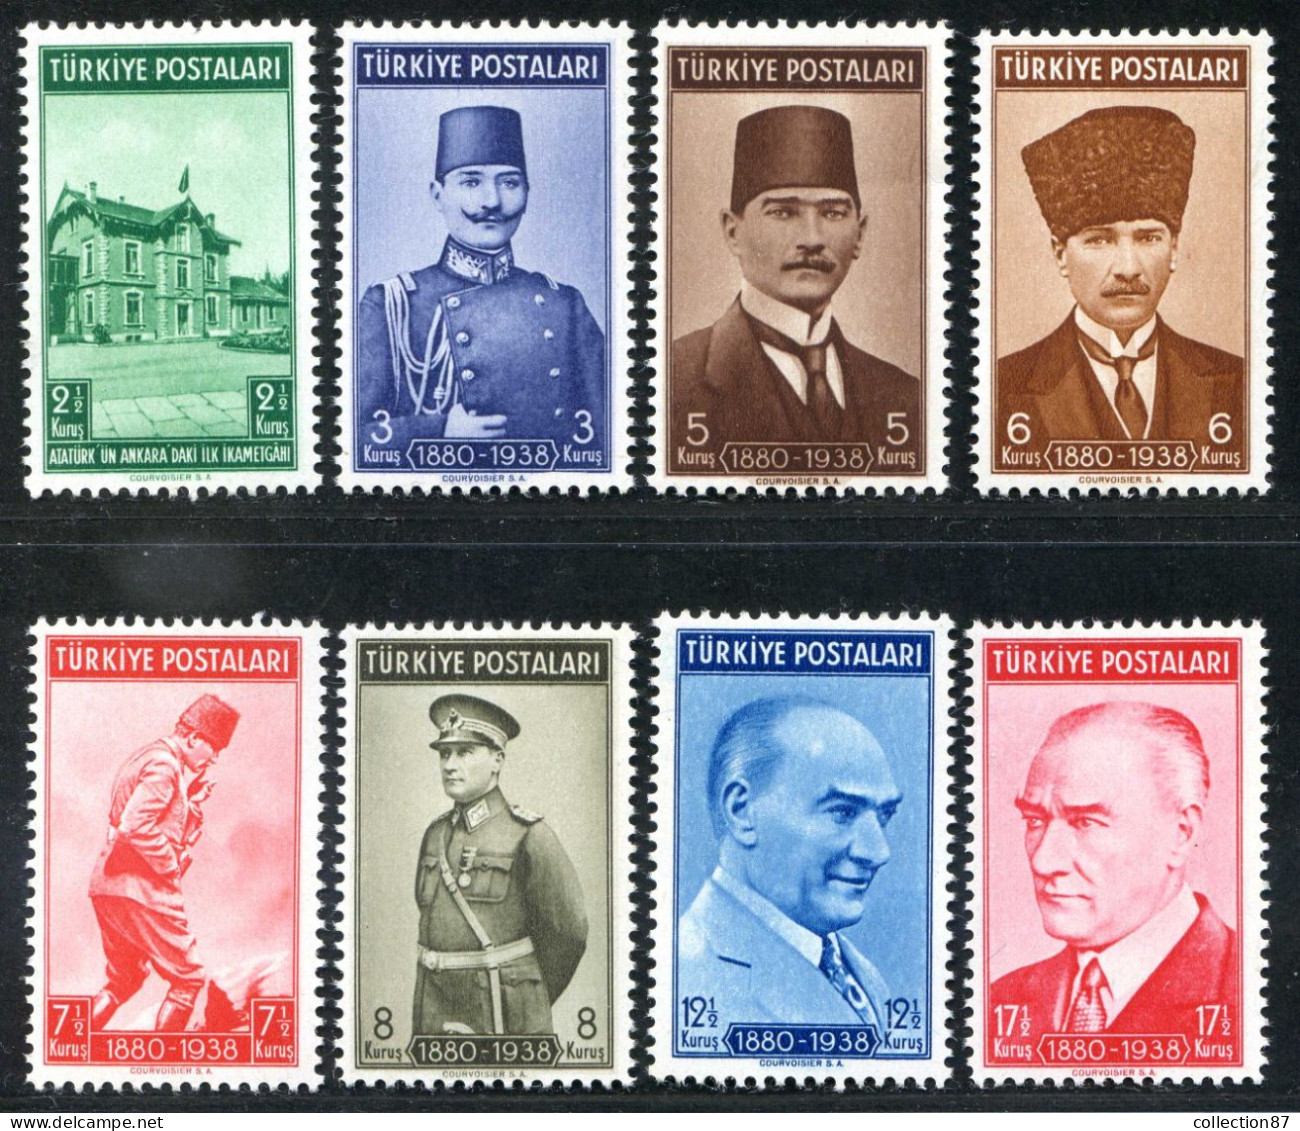 REF 091 > TURQUIE < Yv N° 922 à 929 * * Neuf Luxe Dos Visible MNH * * < Président Ataturk - Unused Stamps